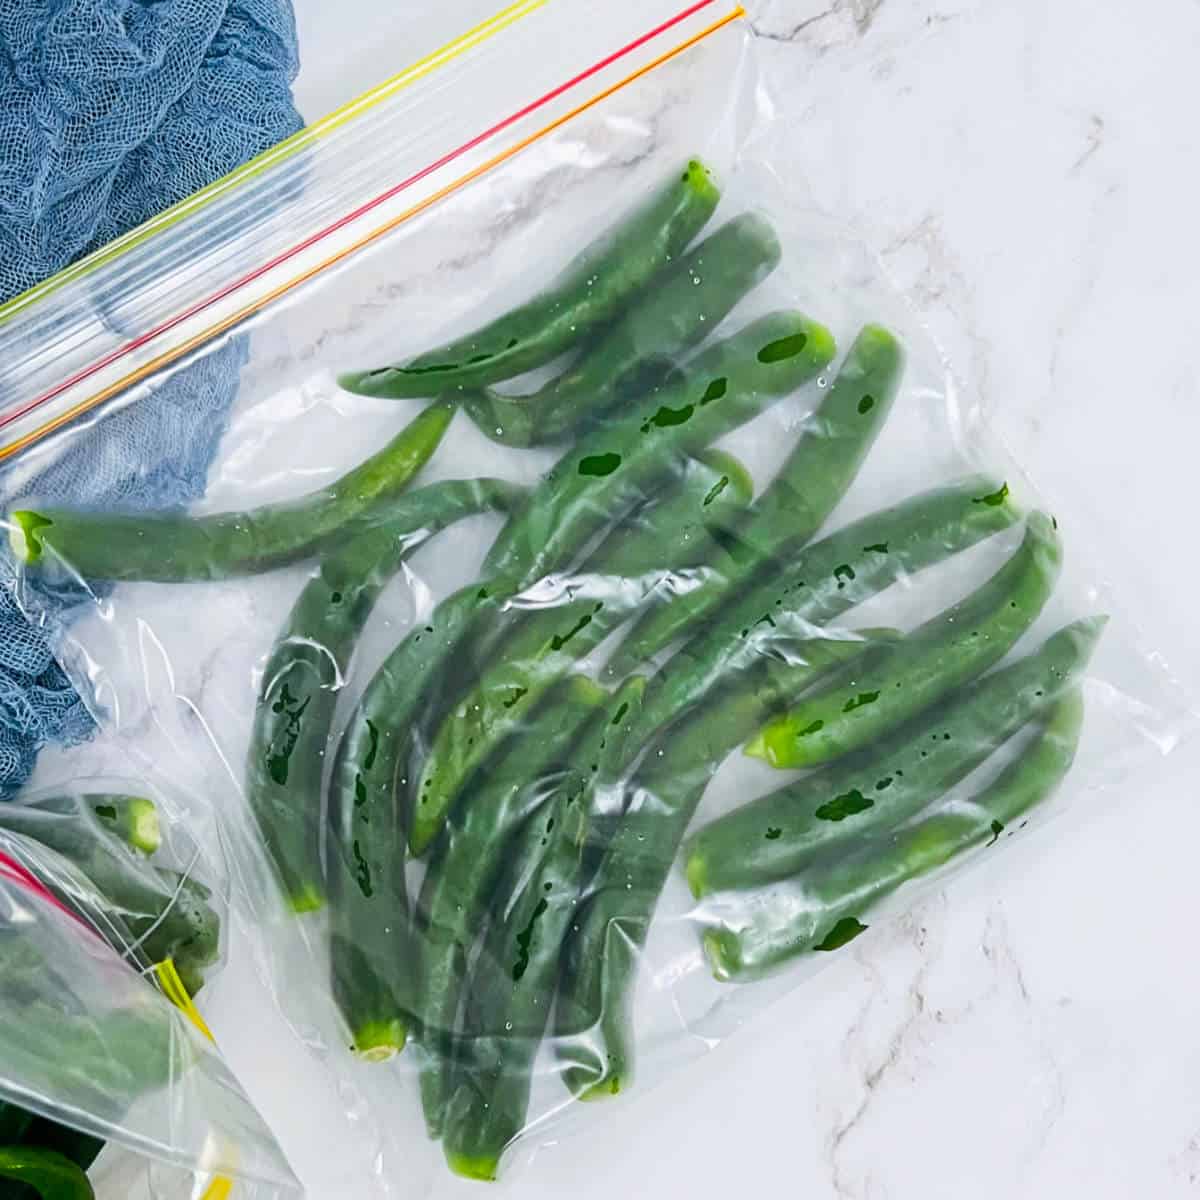 Green chili peppers stored in ziplock bag.